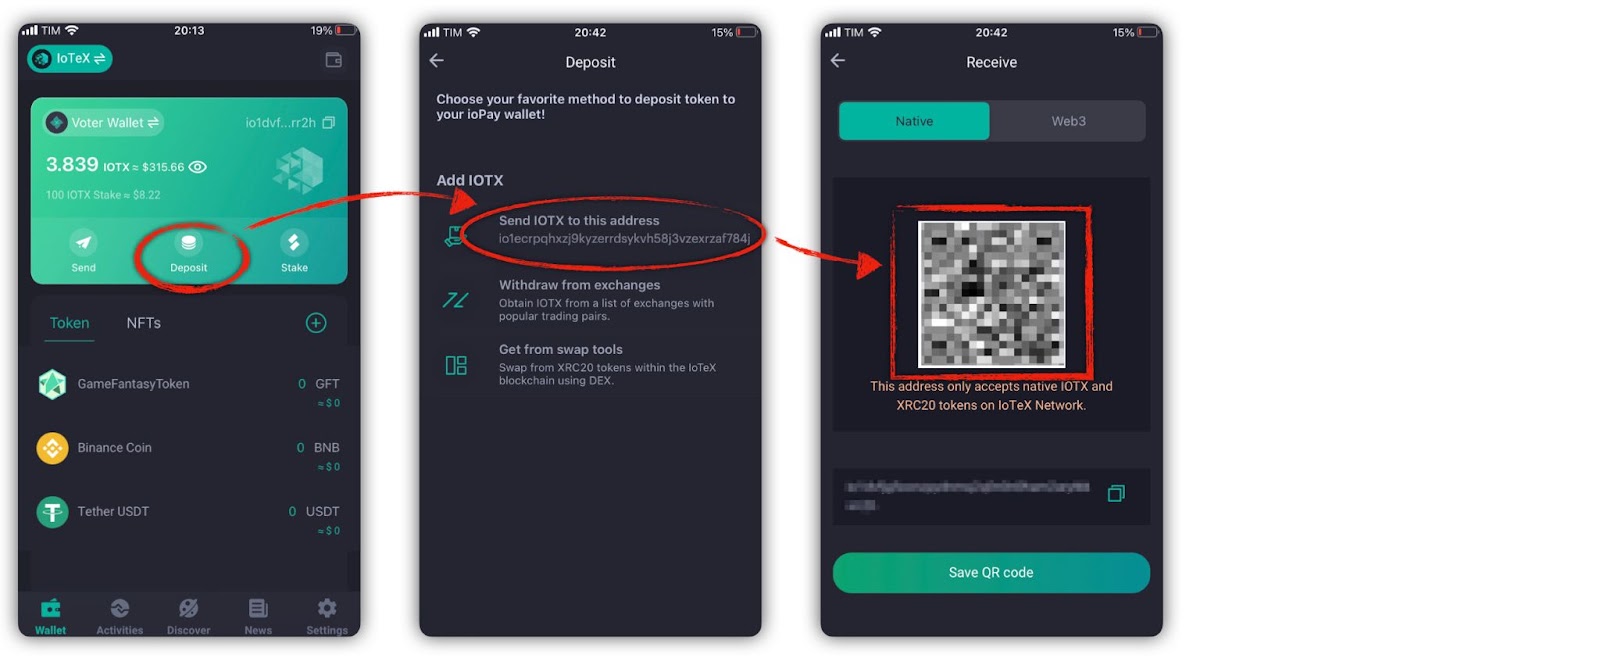 Screenshot of steps to receive IOTX in ioPay app